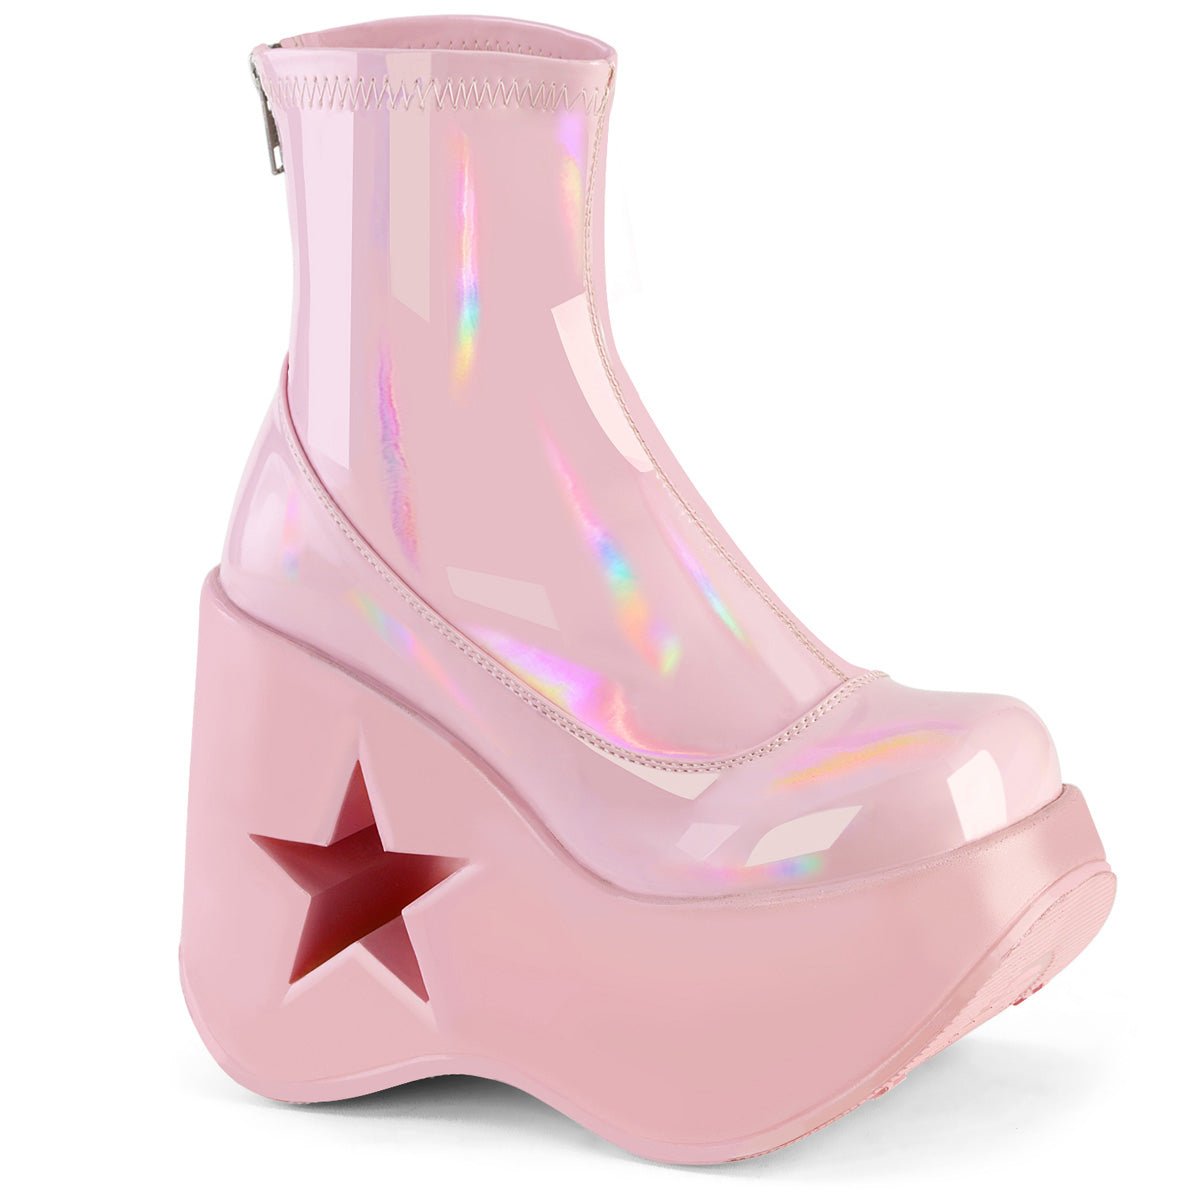 Too Fast | Demonia Dynamite 100 | Baby Pink Stretch Hologram Women's Ankle Boots